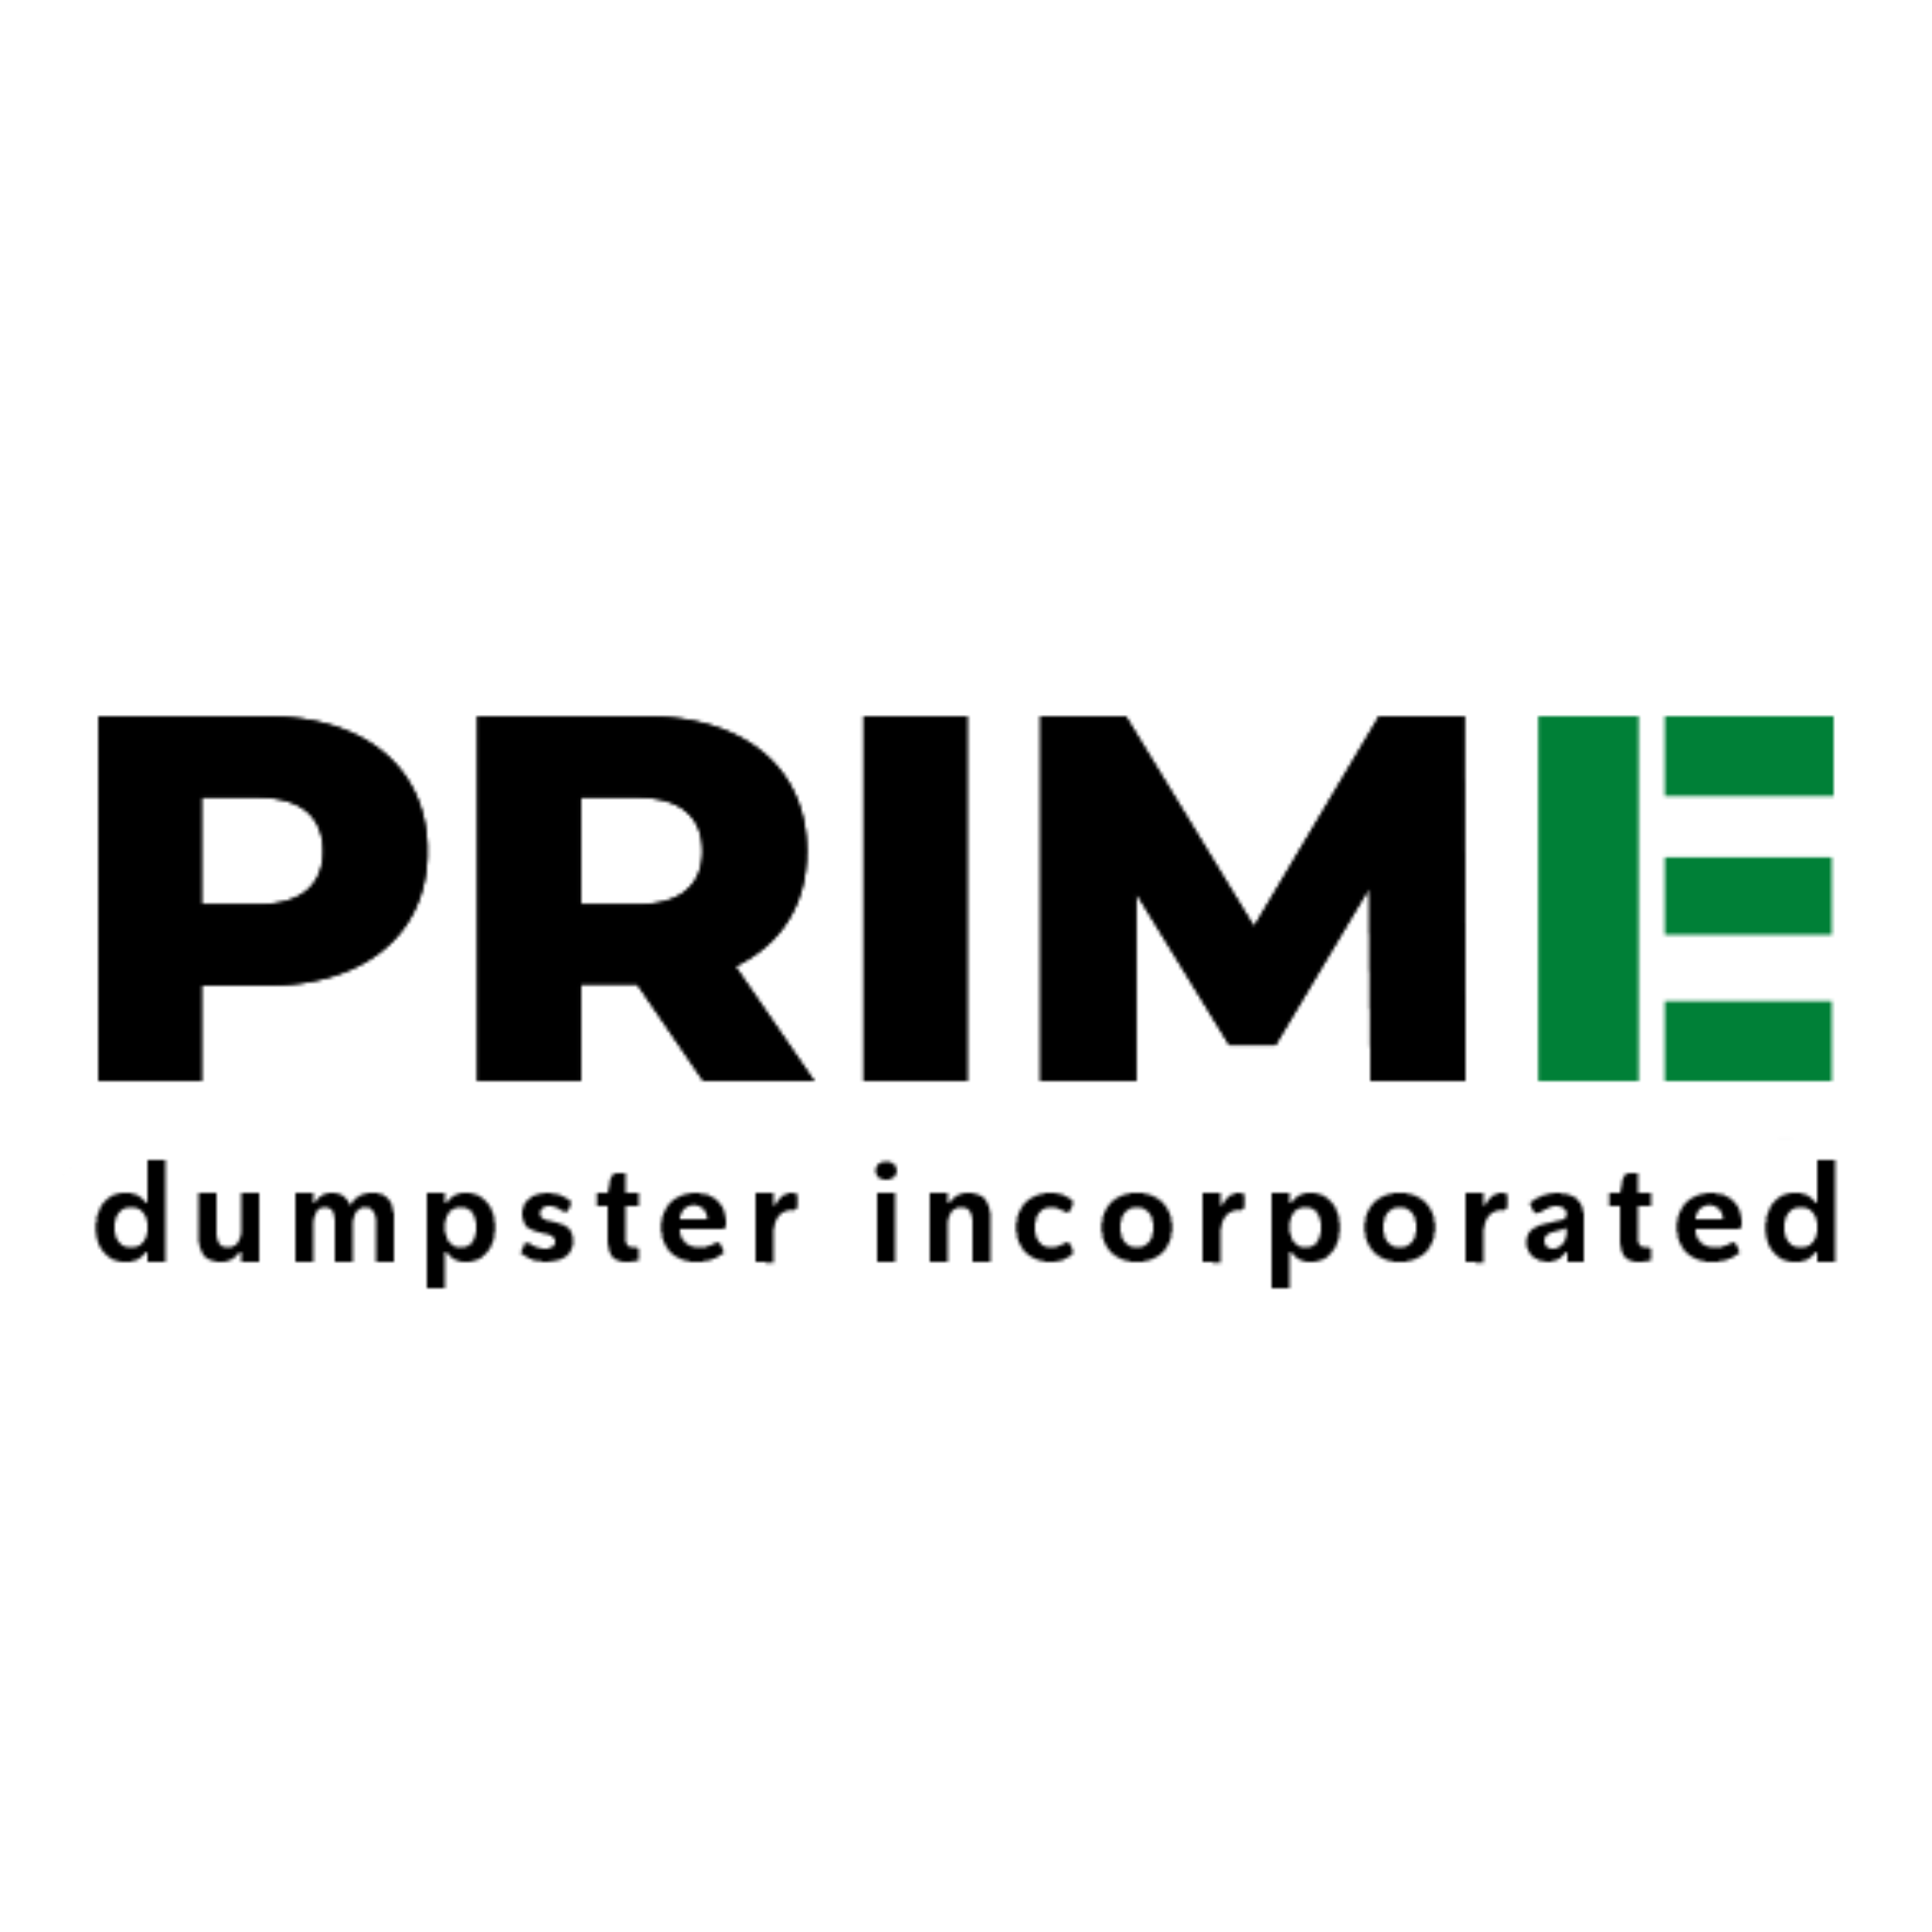 Prime Dumpster Reaffirms Commitment to Customer Satisfaction at the Core of Its Services